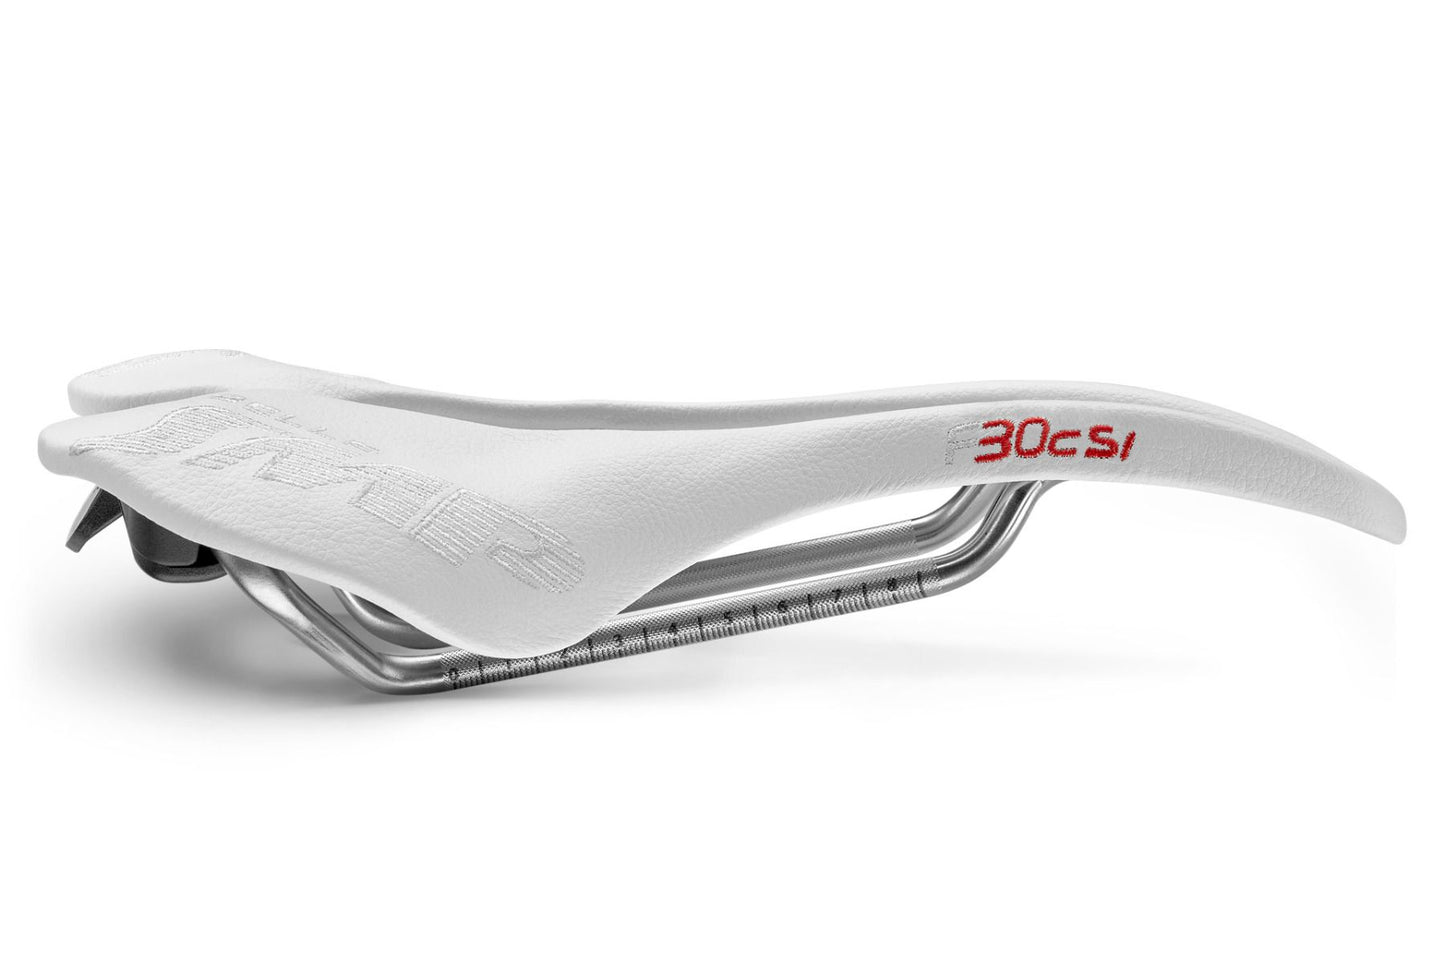 Selle SMP F30C s.i. Bicycle Saddle with Carbon Rails (White)